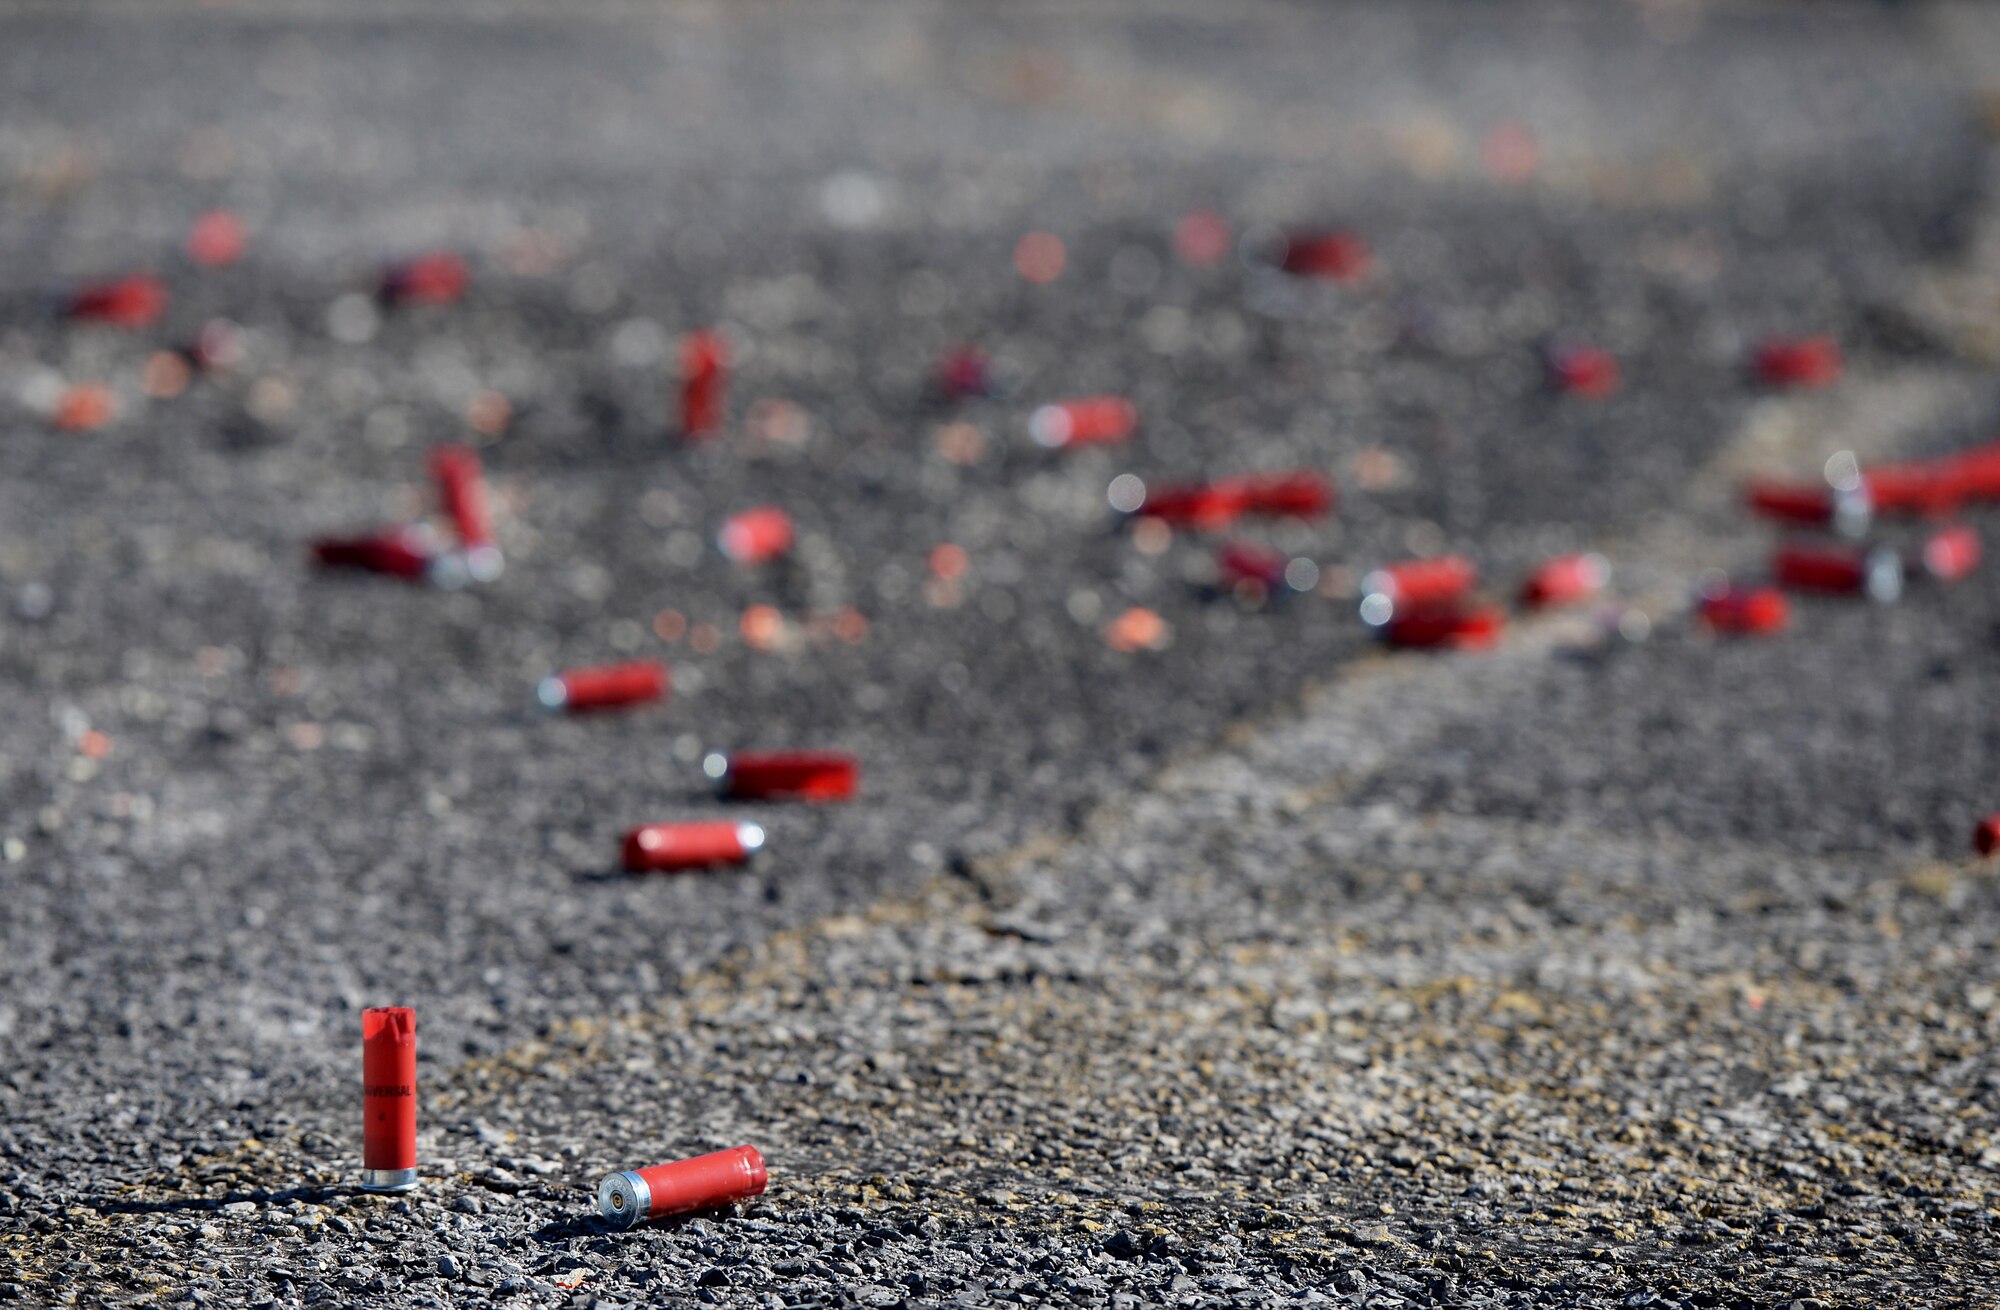 Shells lay scattered at the firing range after the turkey shoot’s skeet shooting event Oct. 26, 2017, on Columbus Air Force Base, Mississippi. Skeet shooting was one of three parts during the competition and shooters had a chance earn 100 points, the total competition was out of 300 points. (U.S. Air Force photo by Airman 1st Class Keith Holcomb)